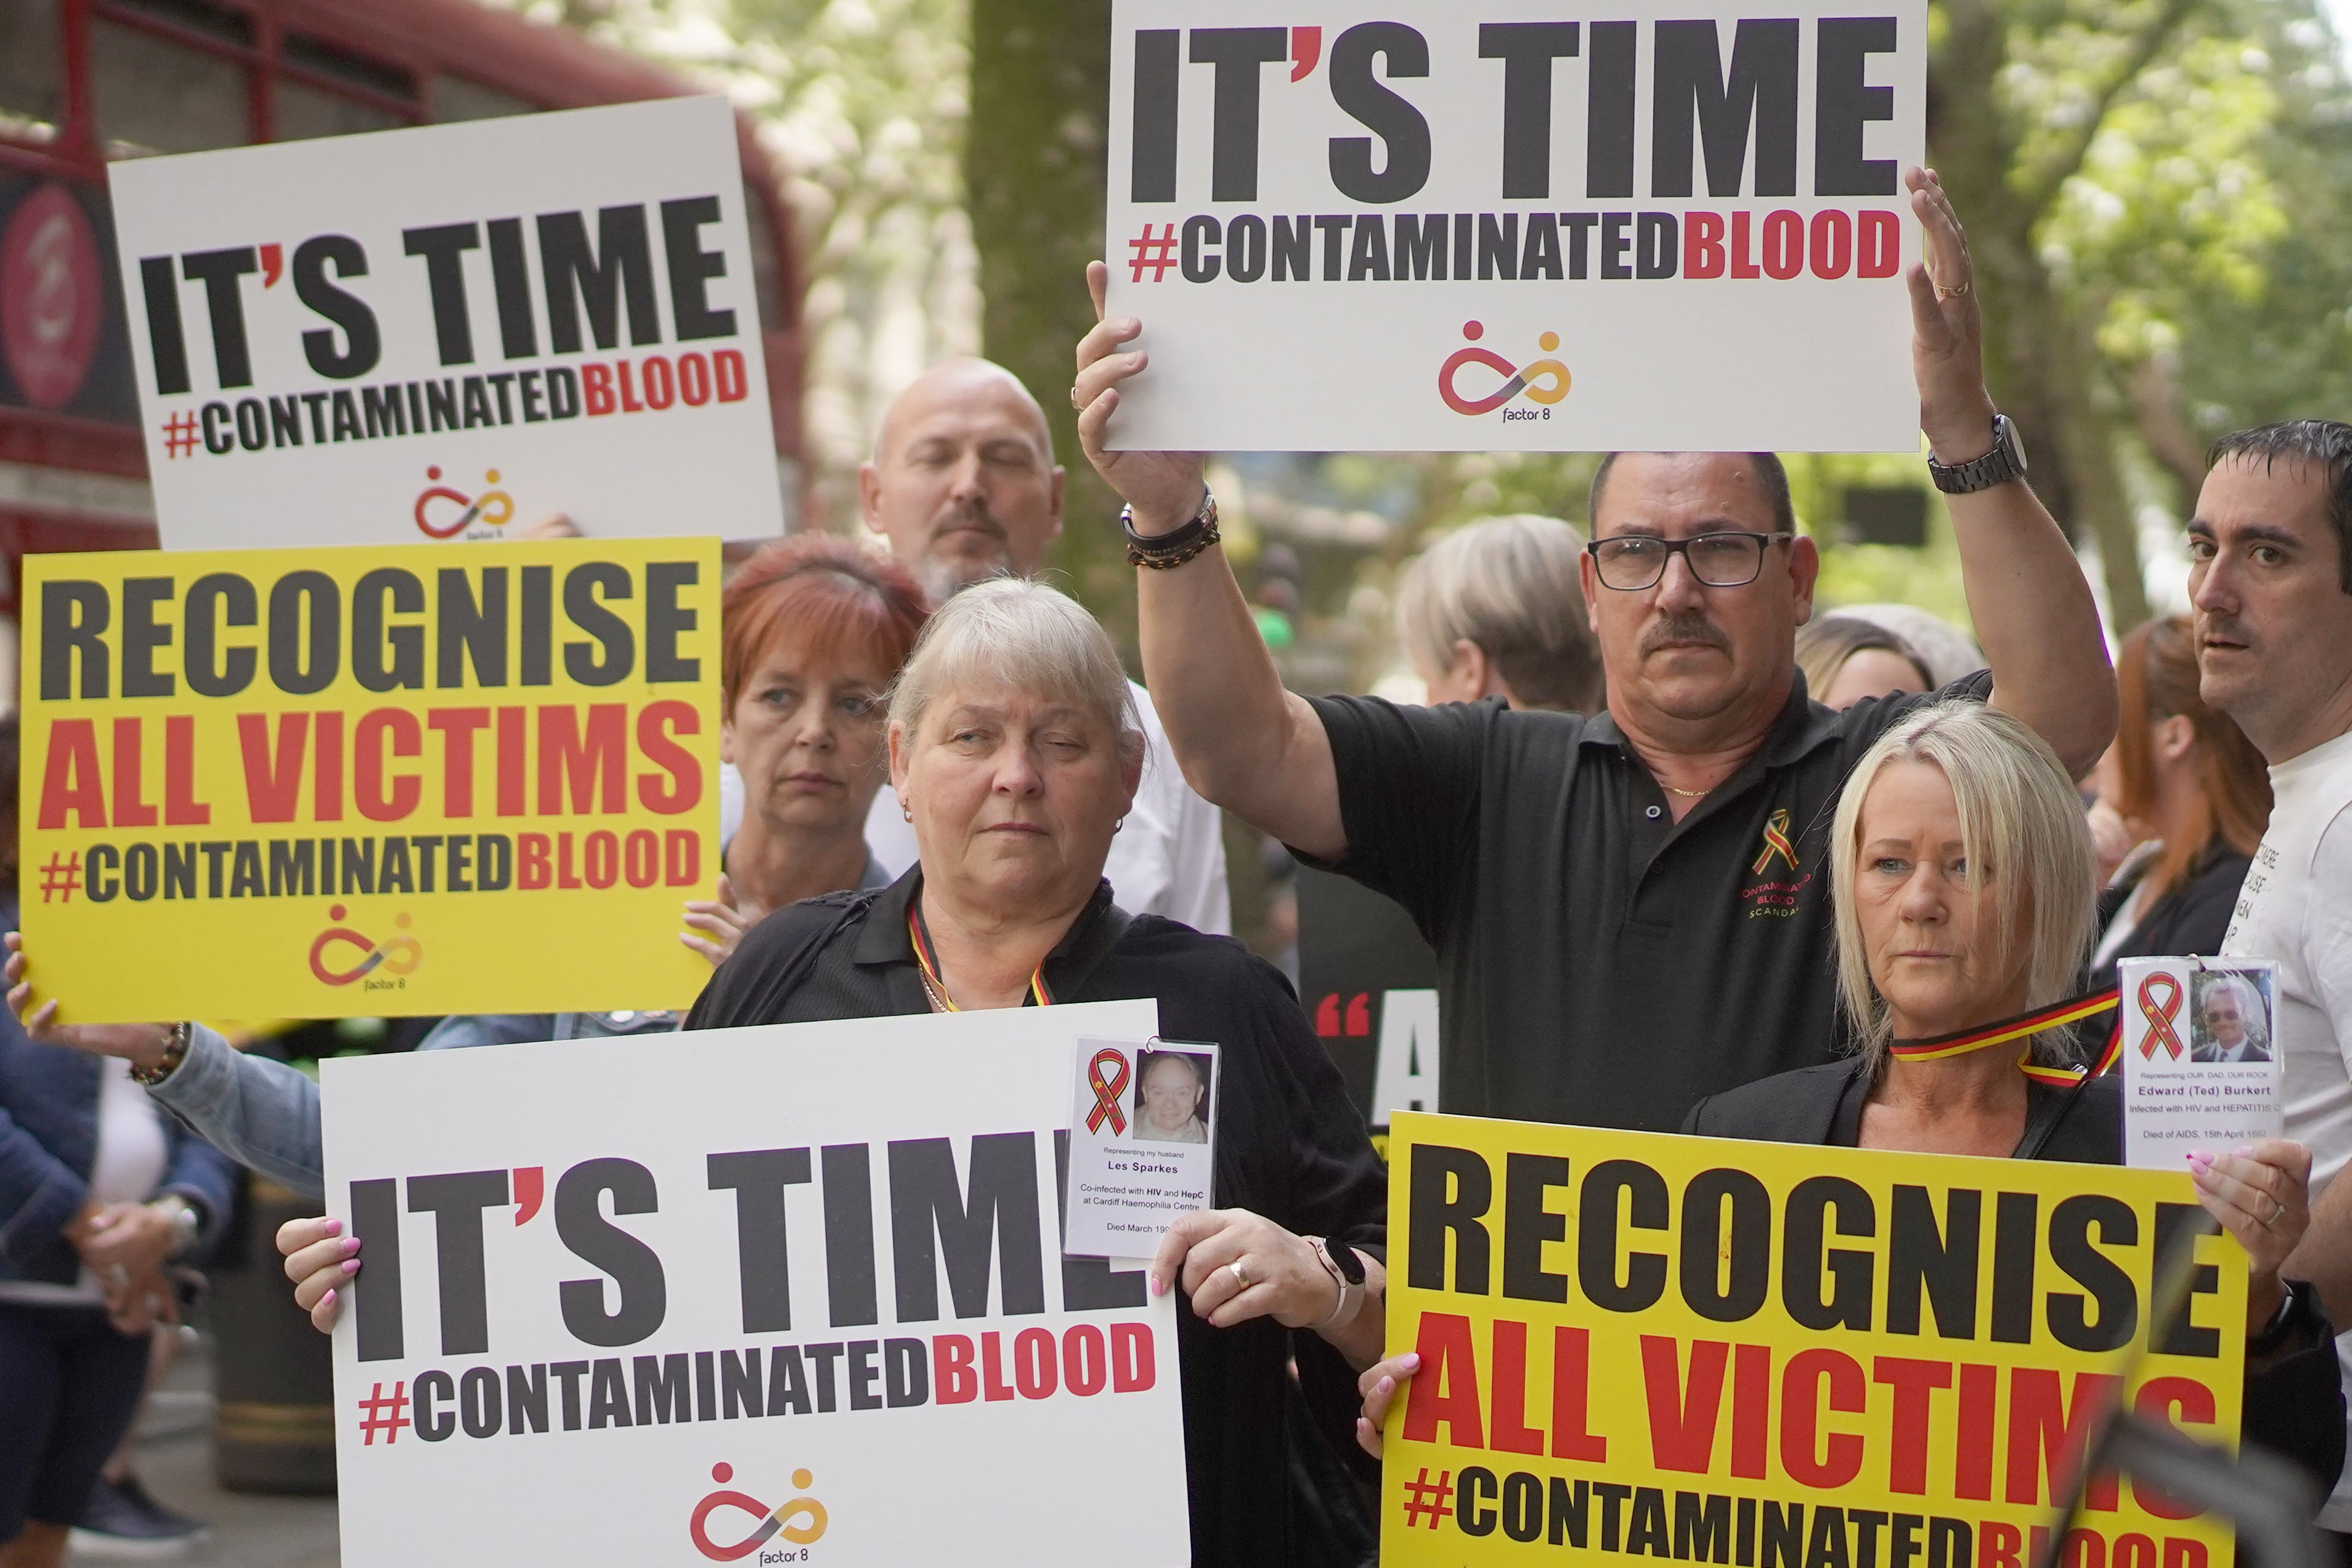 As many as 3,000 people died as a direct result of receiving contaminated blood